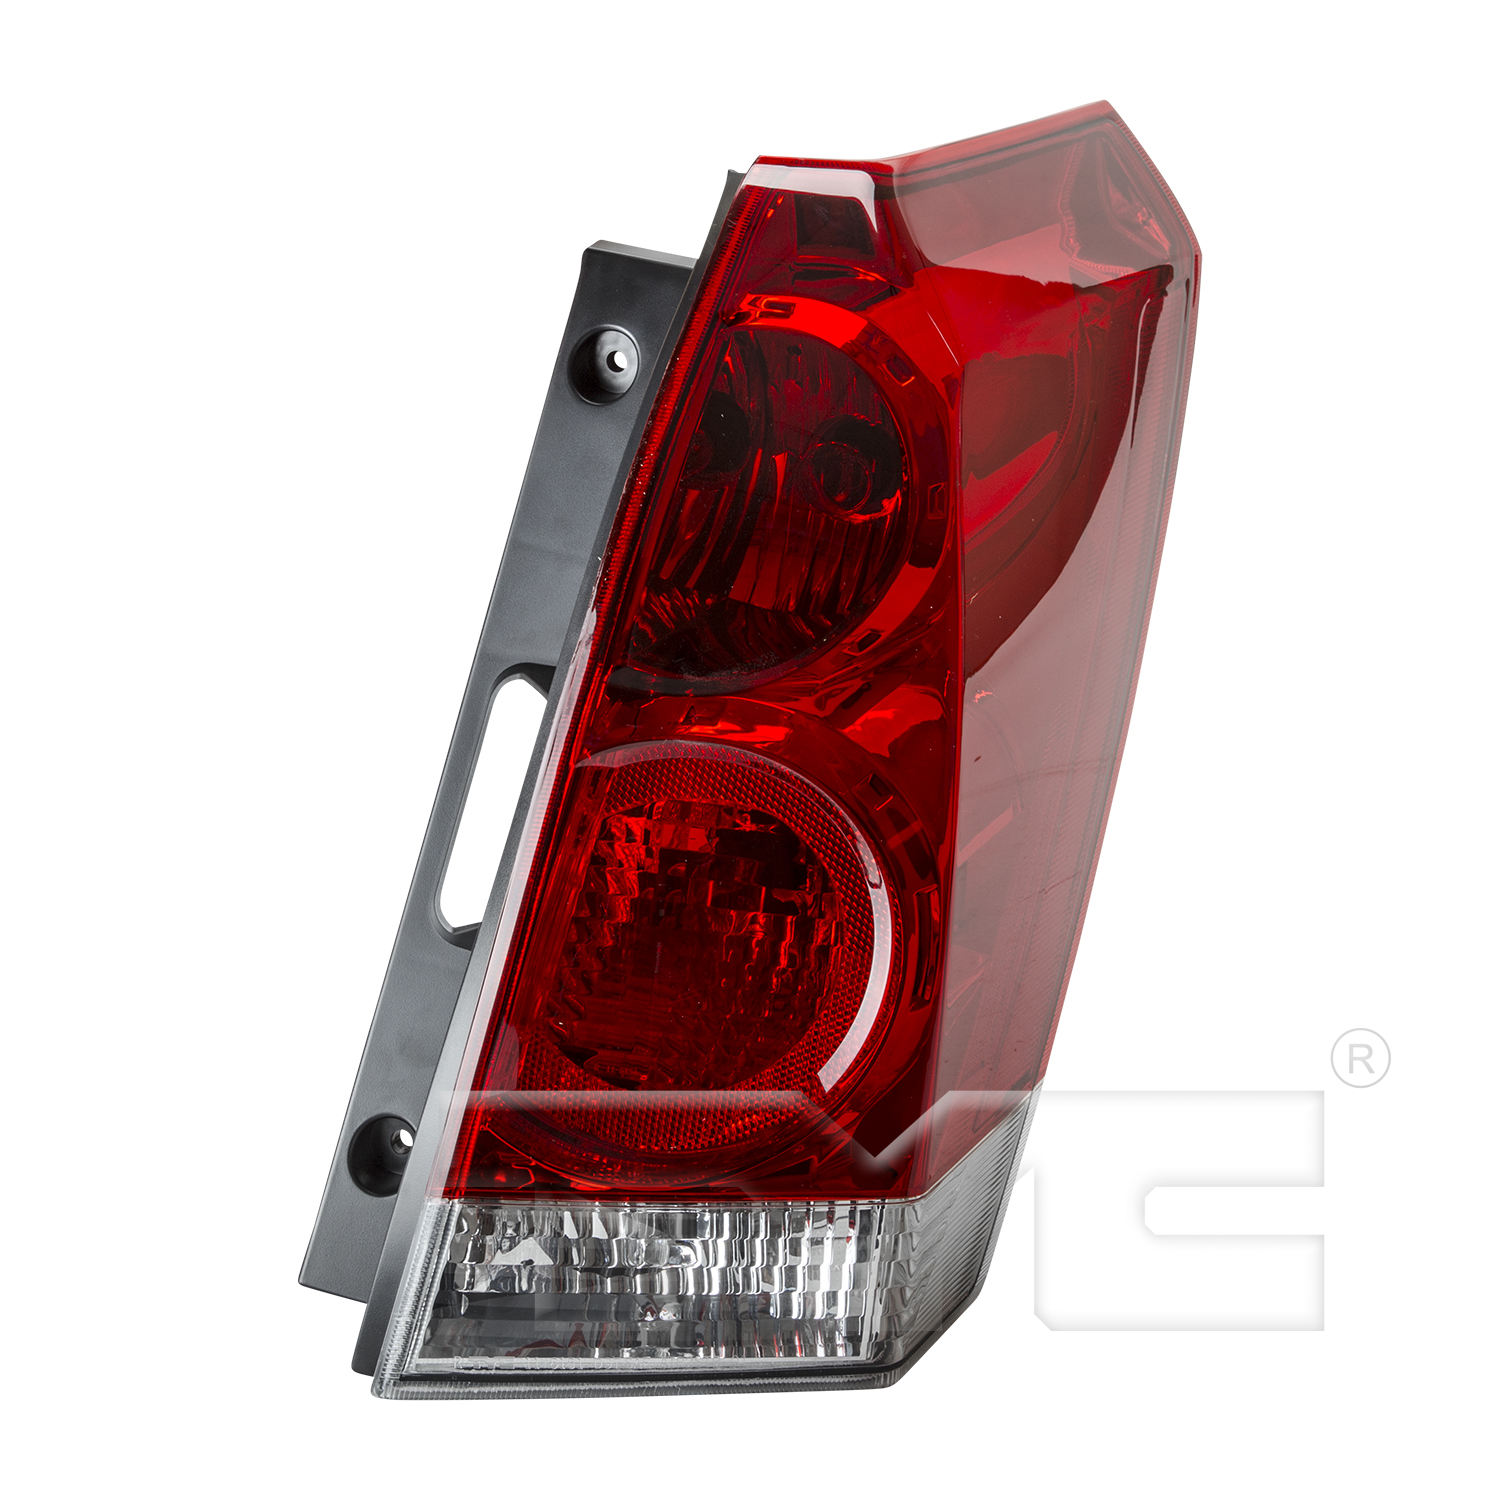 Aftermarket TAILLIGHTS for NISSAN - QUEST VAN, QUEST,04-9,RIGHT HANDSIDE TAILLIGHT CAPA